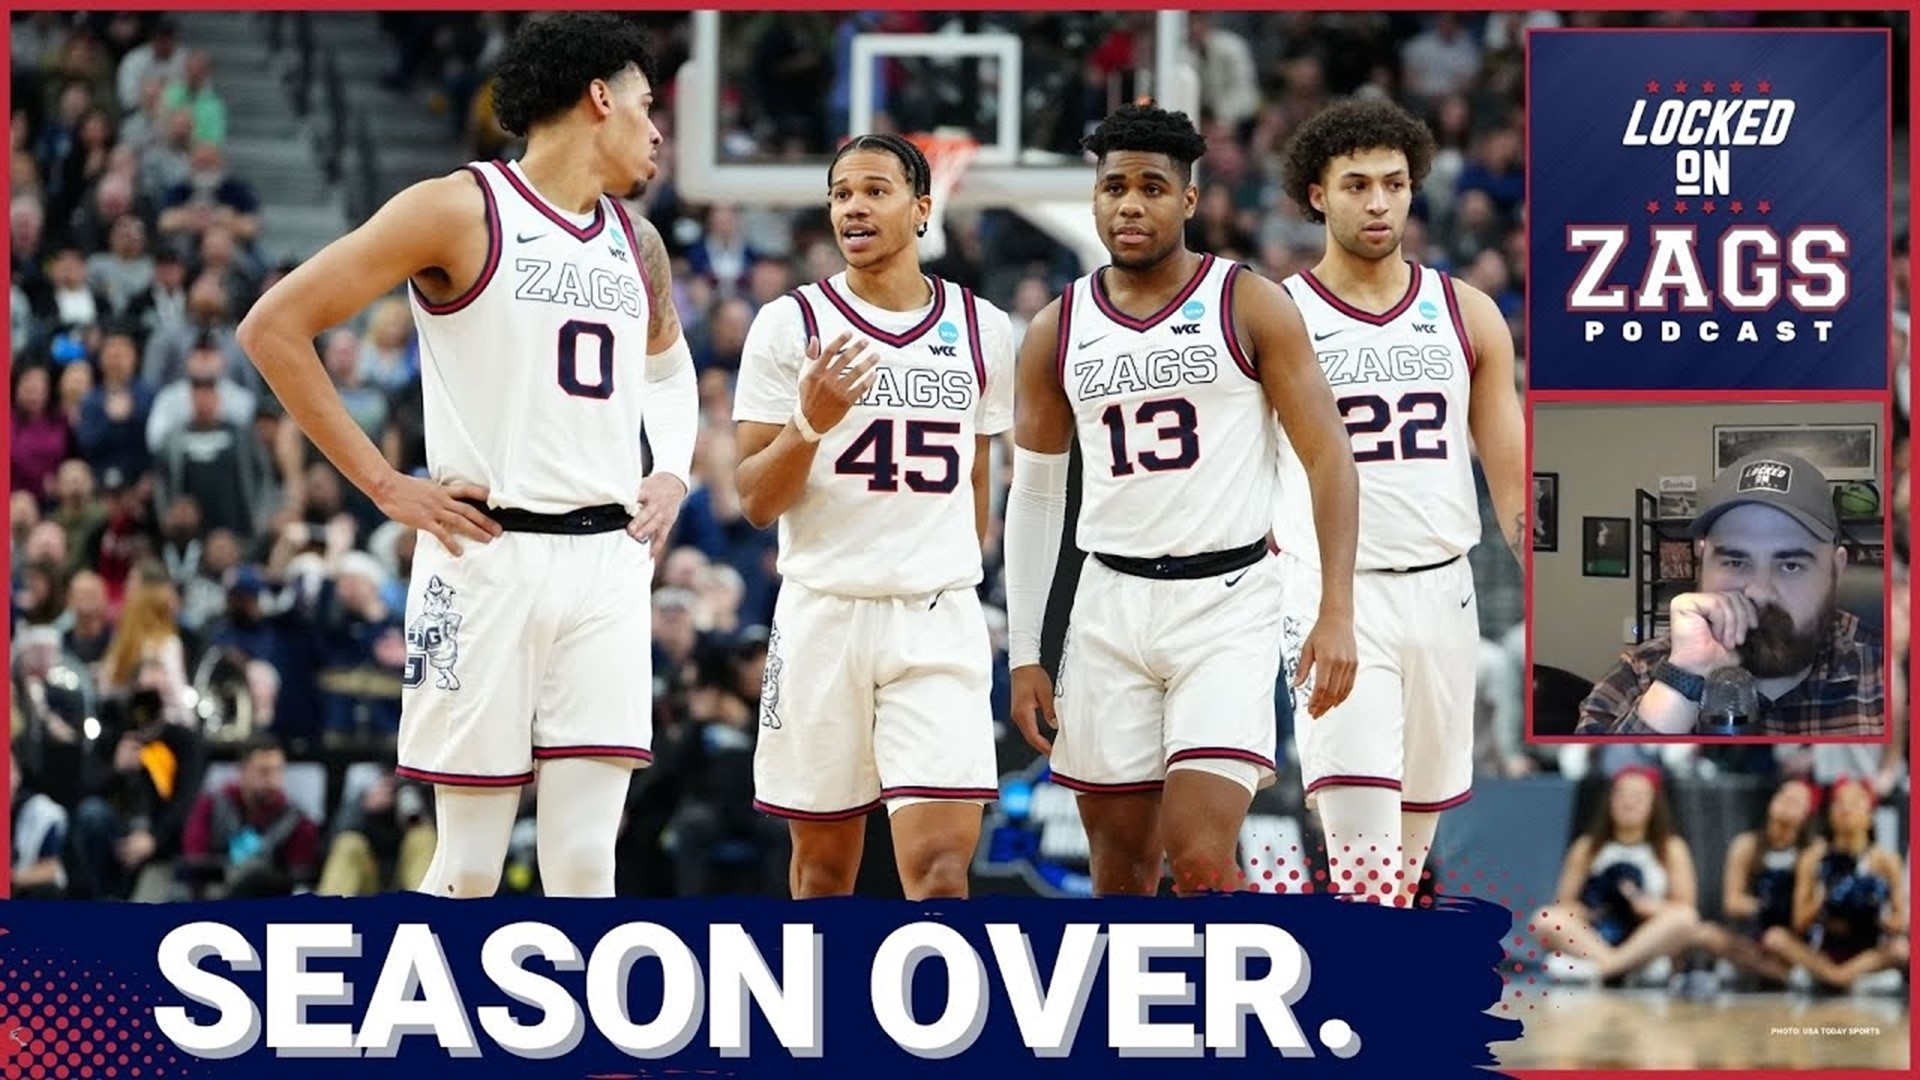 The Gonzaga Bulldogs 2022-23 season is over after falling in the Elite 8 to UConn thanks to a horrendous shooting night from Mark Few's team.